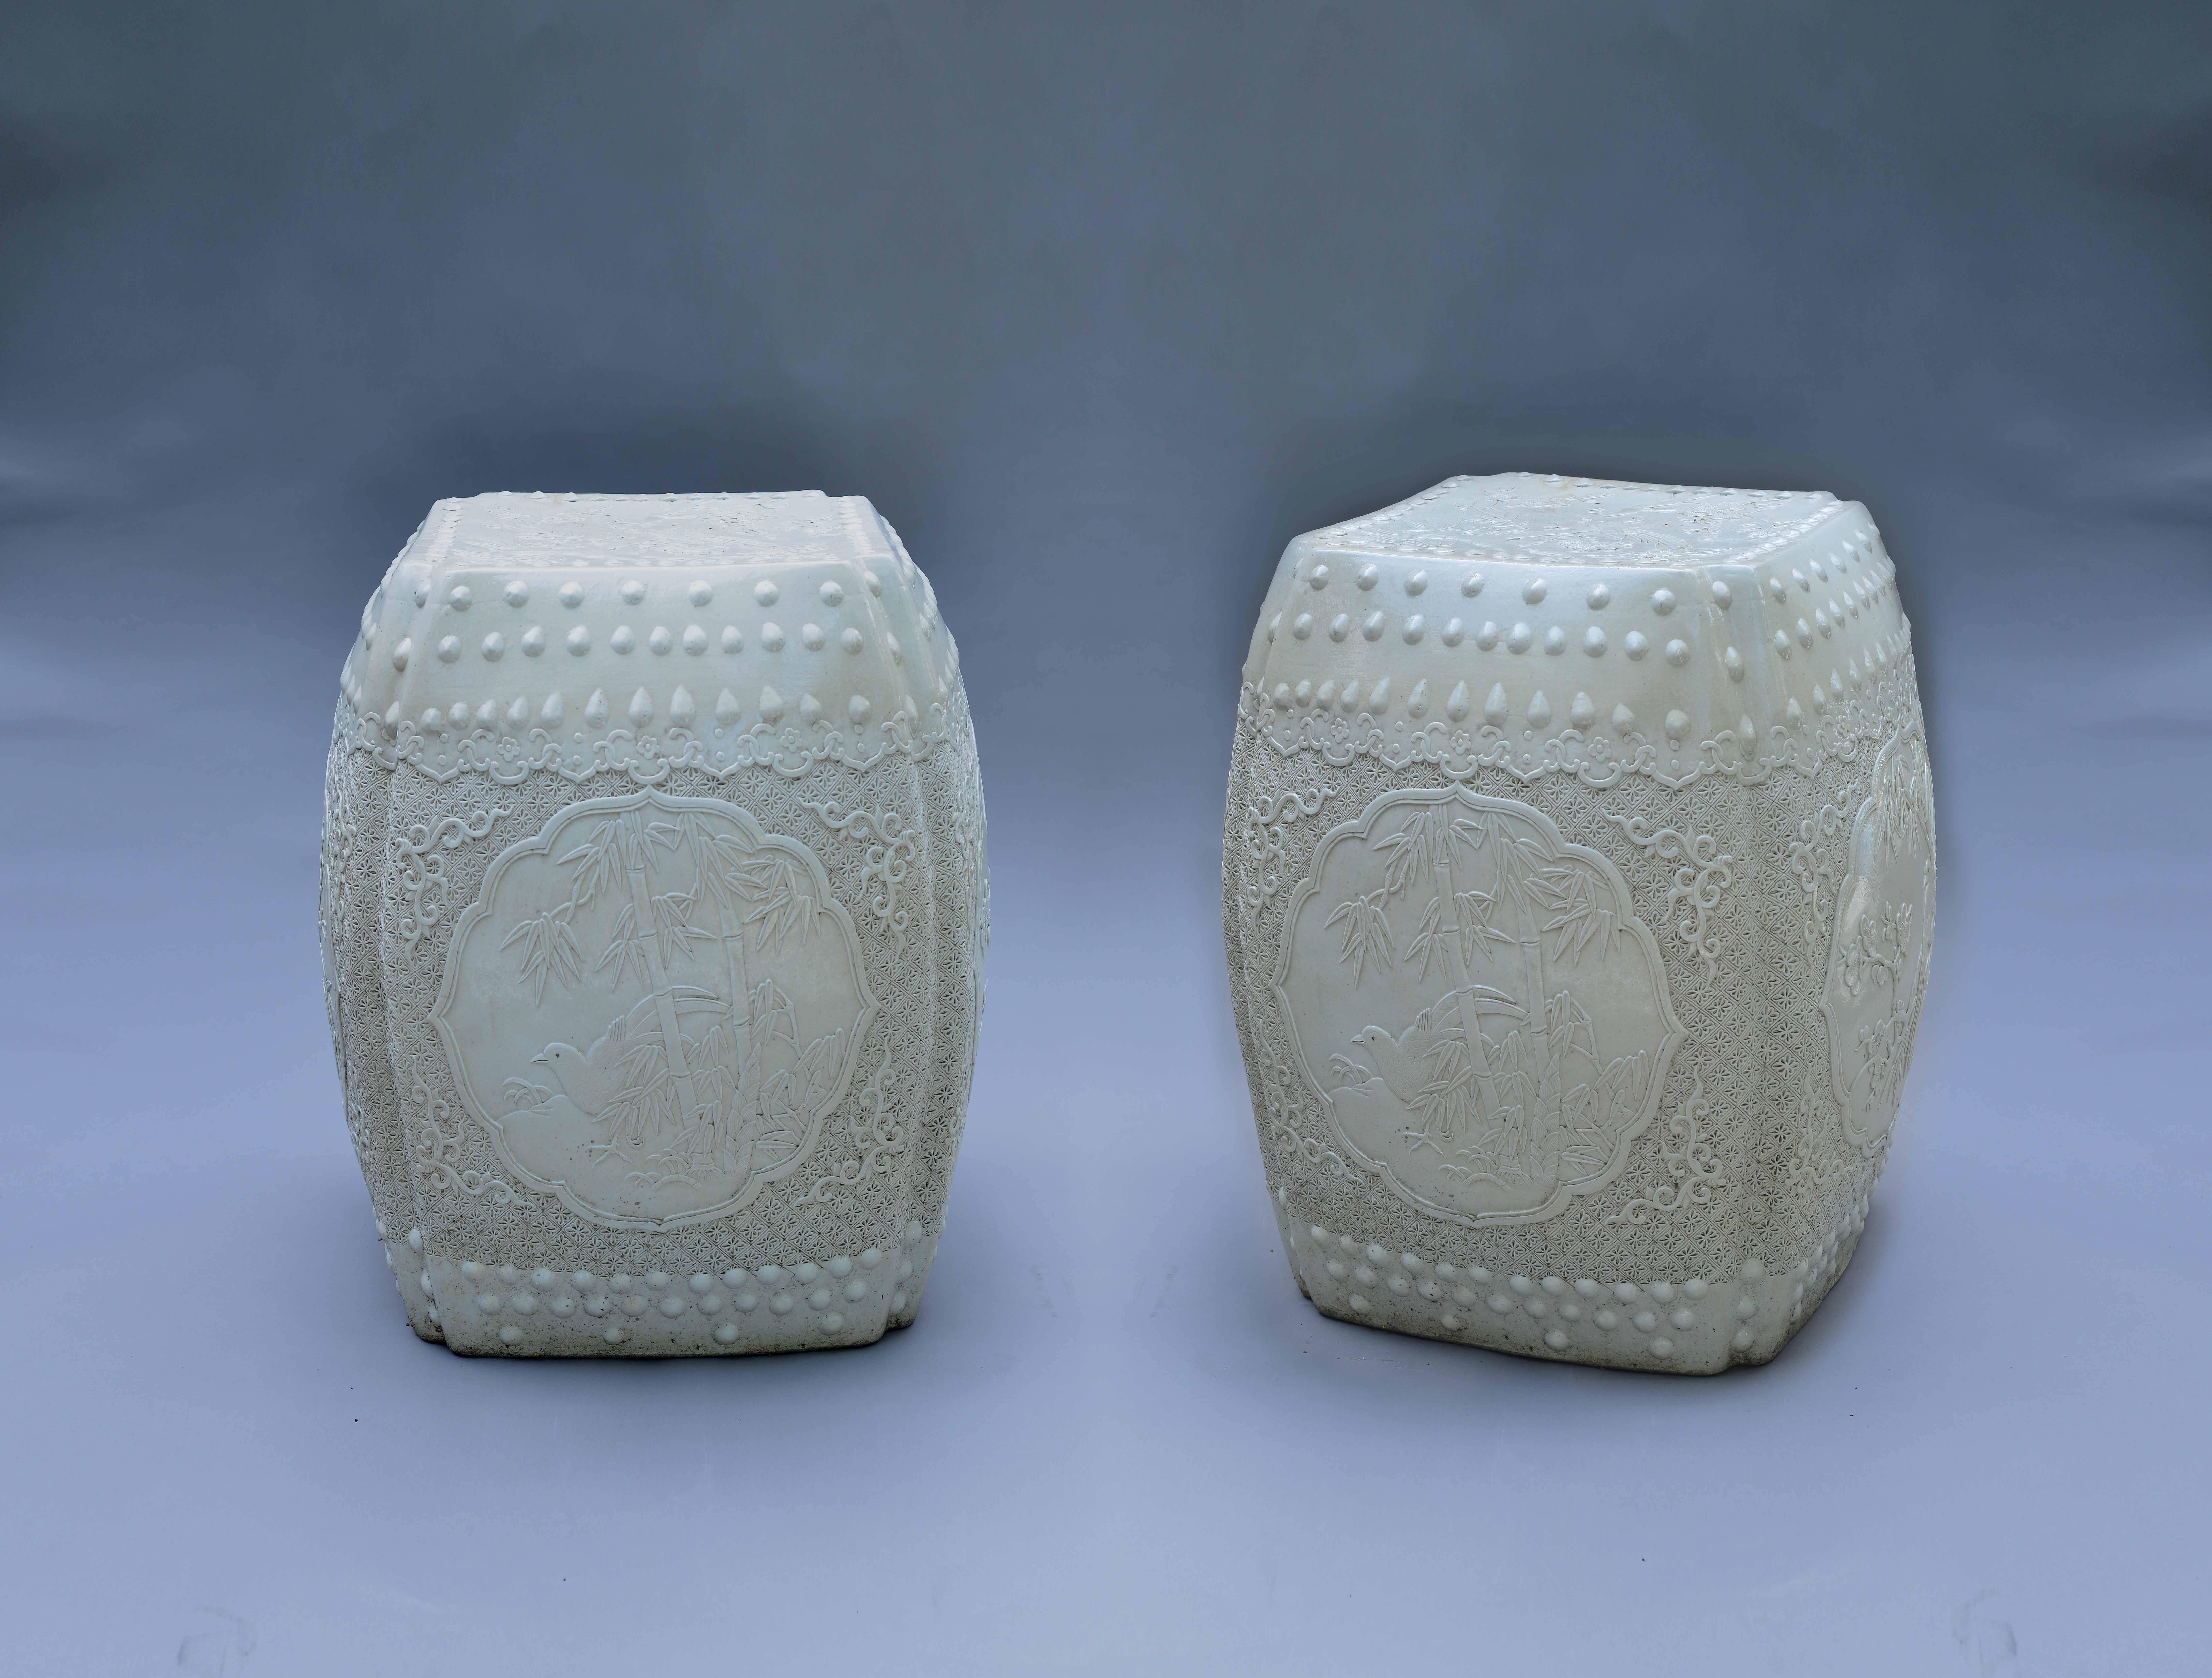 A pair of fine carved porcelain stools with flowers and birds decoration.